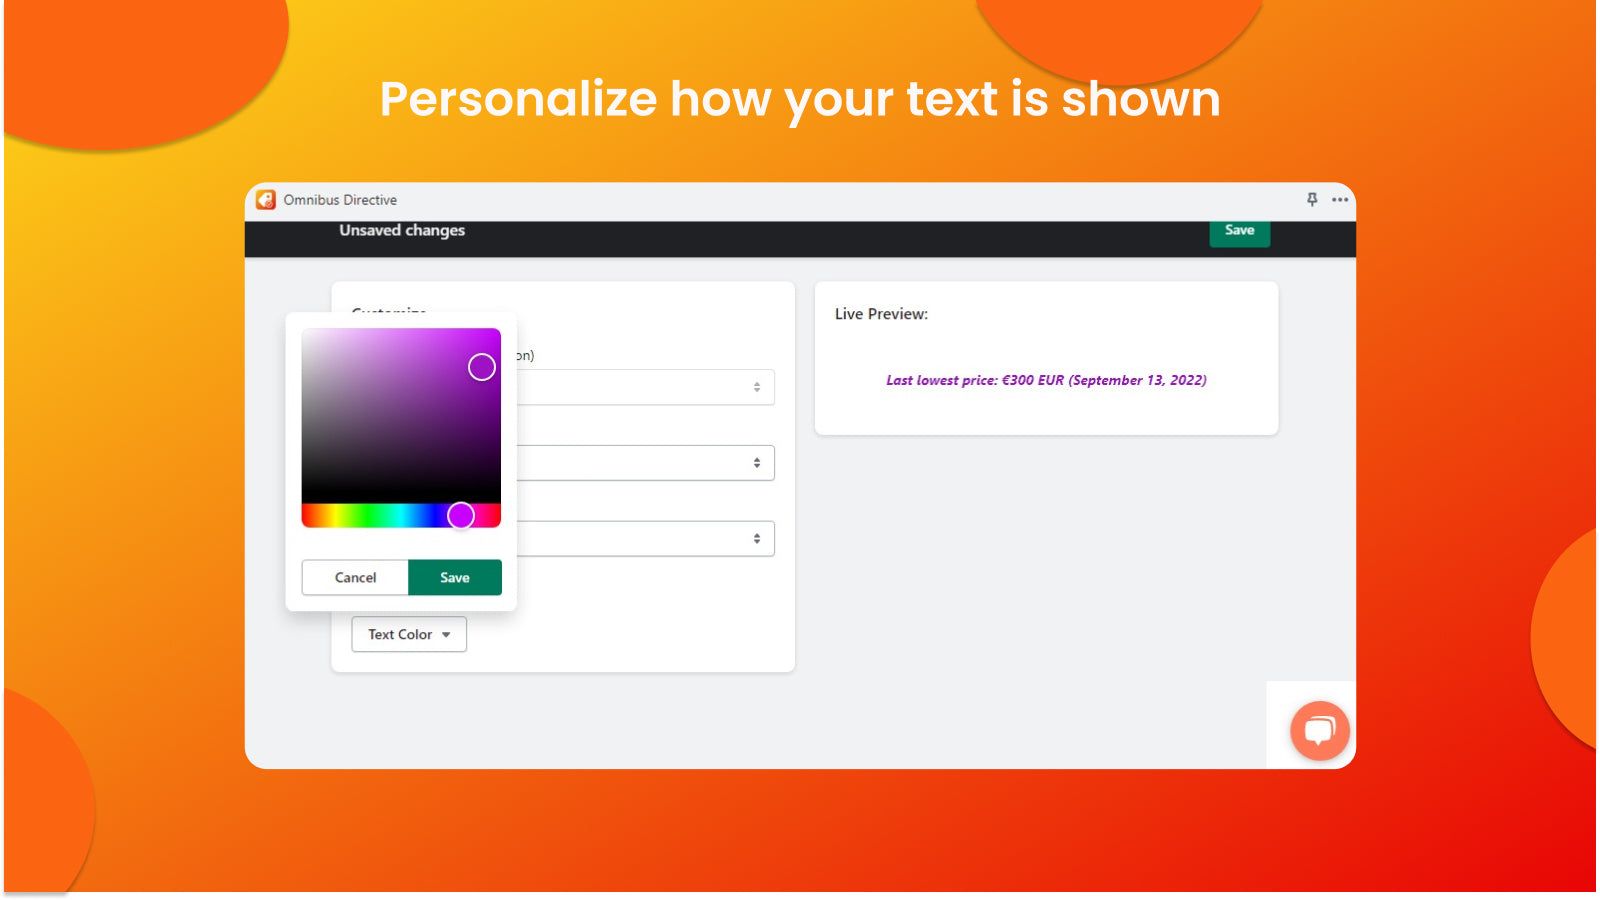 Personalize how your text is shown